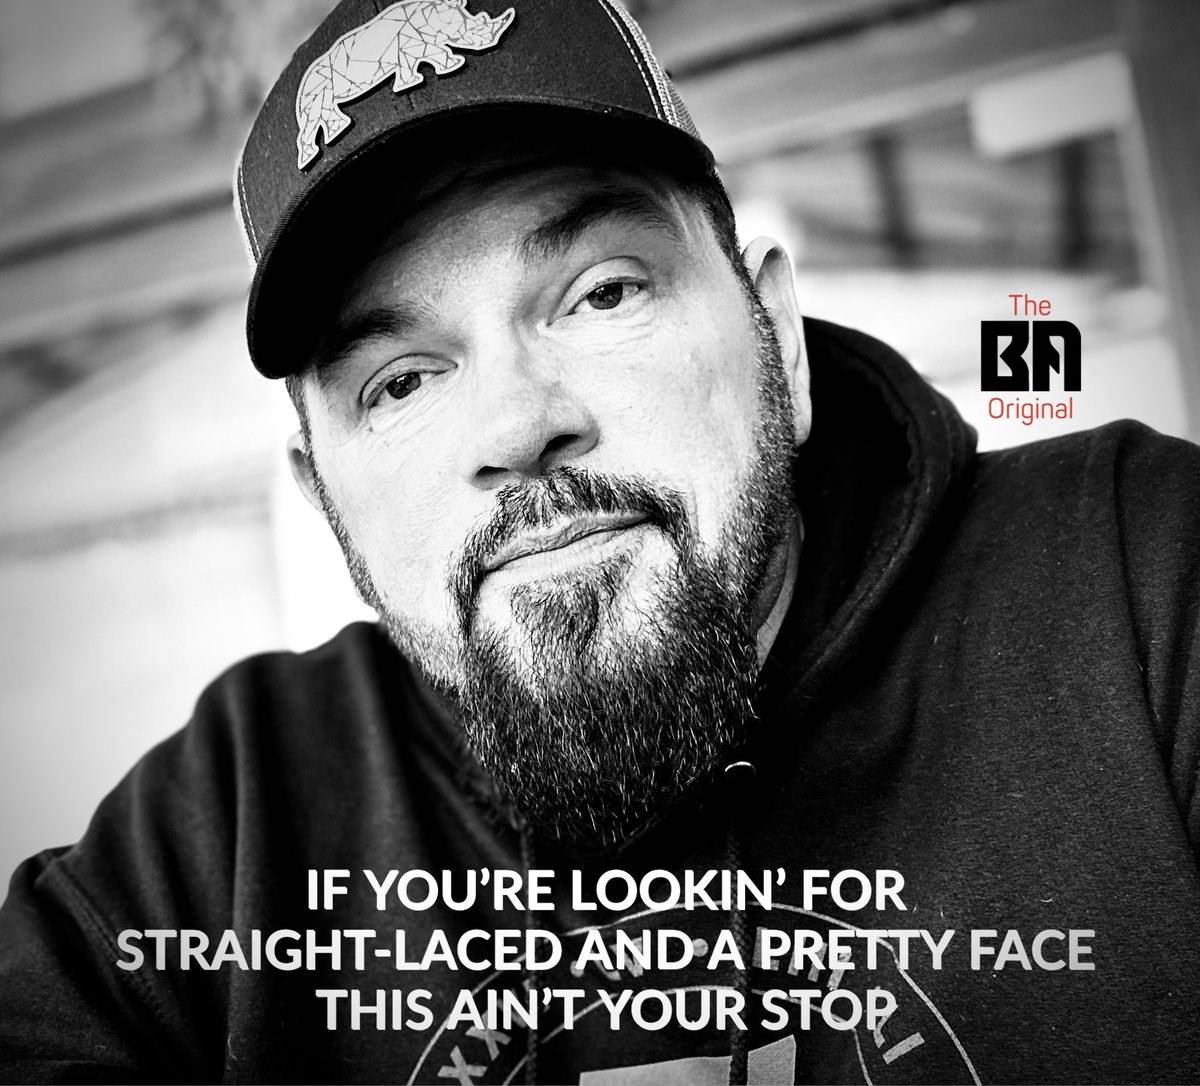 ALL YOU CAN BE IS ALL THAT YOU ARE!  GET TO WORK!
#BadassOriginal #BadassNation #Rough #Rugged #Raw #Outlaw #Renegade #ColorOutsideTheLines #ThereIsNoRightAnswer #WhyNotYou